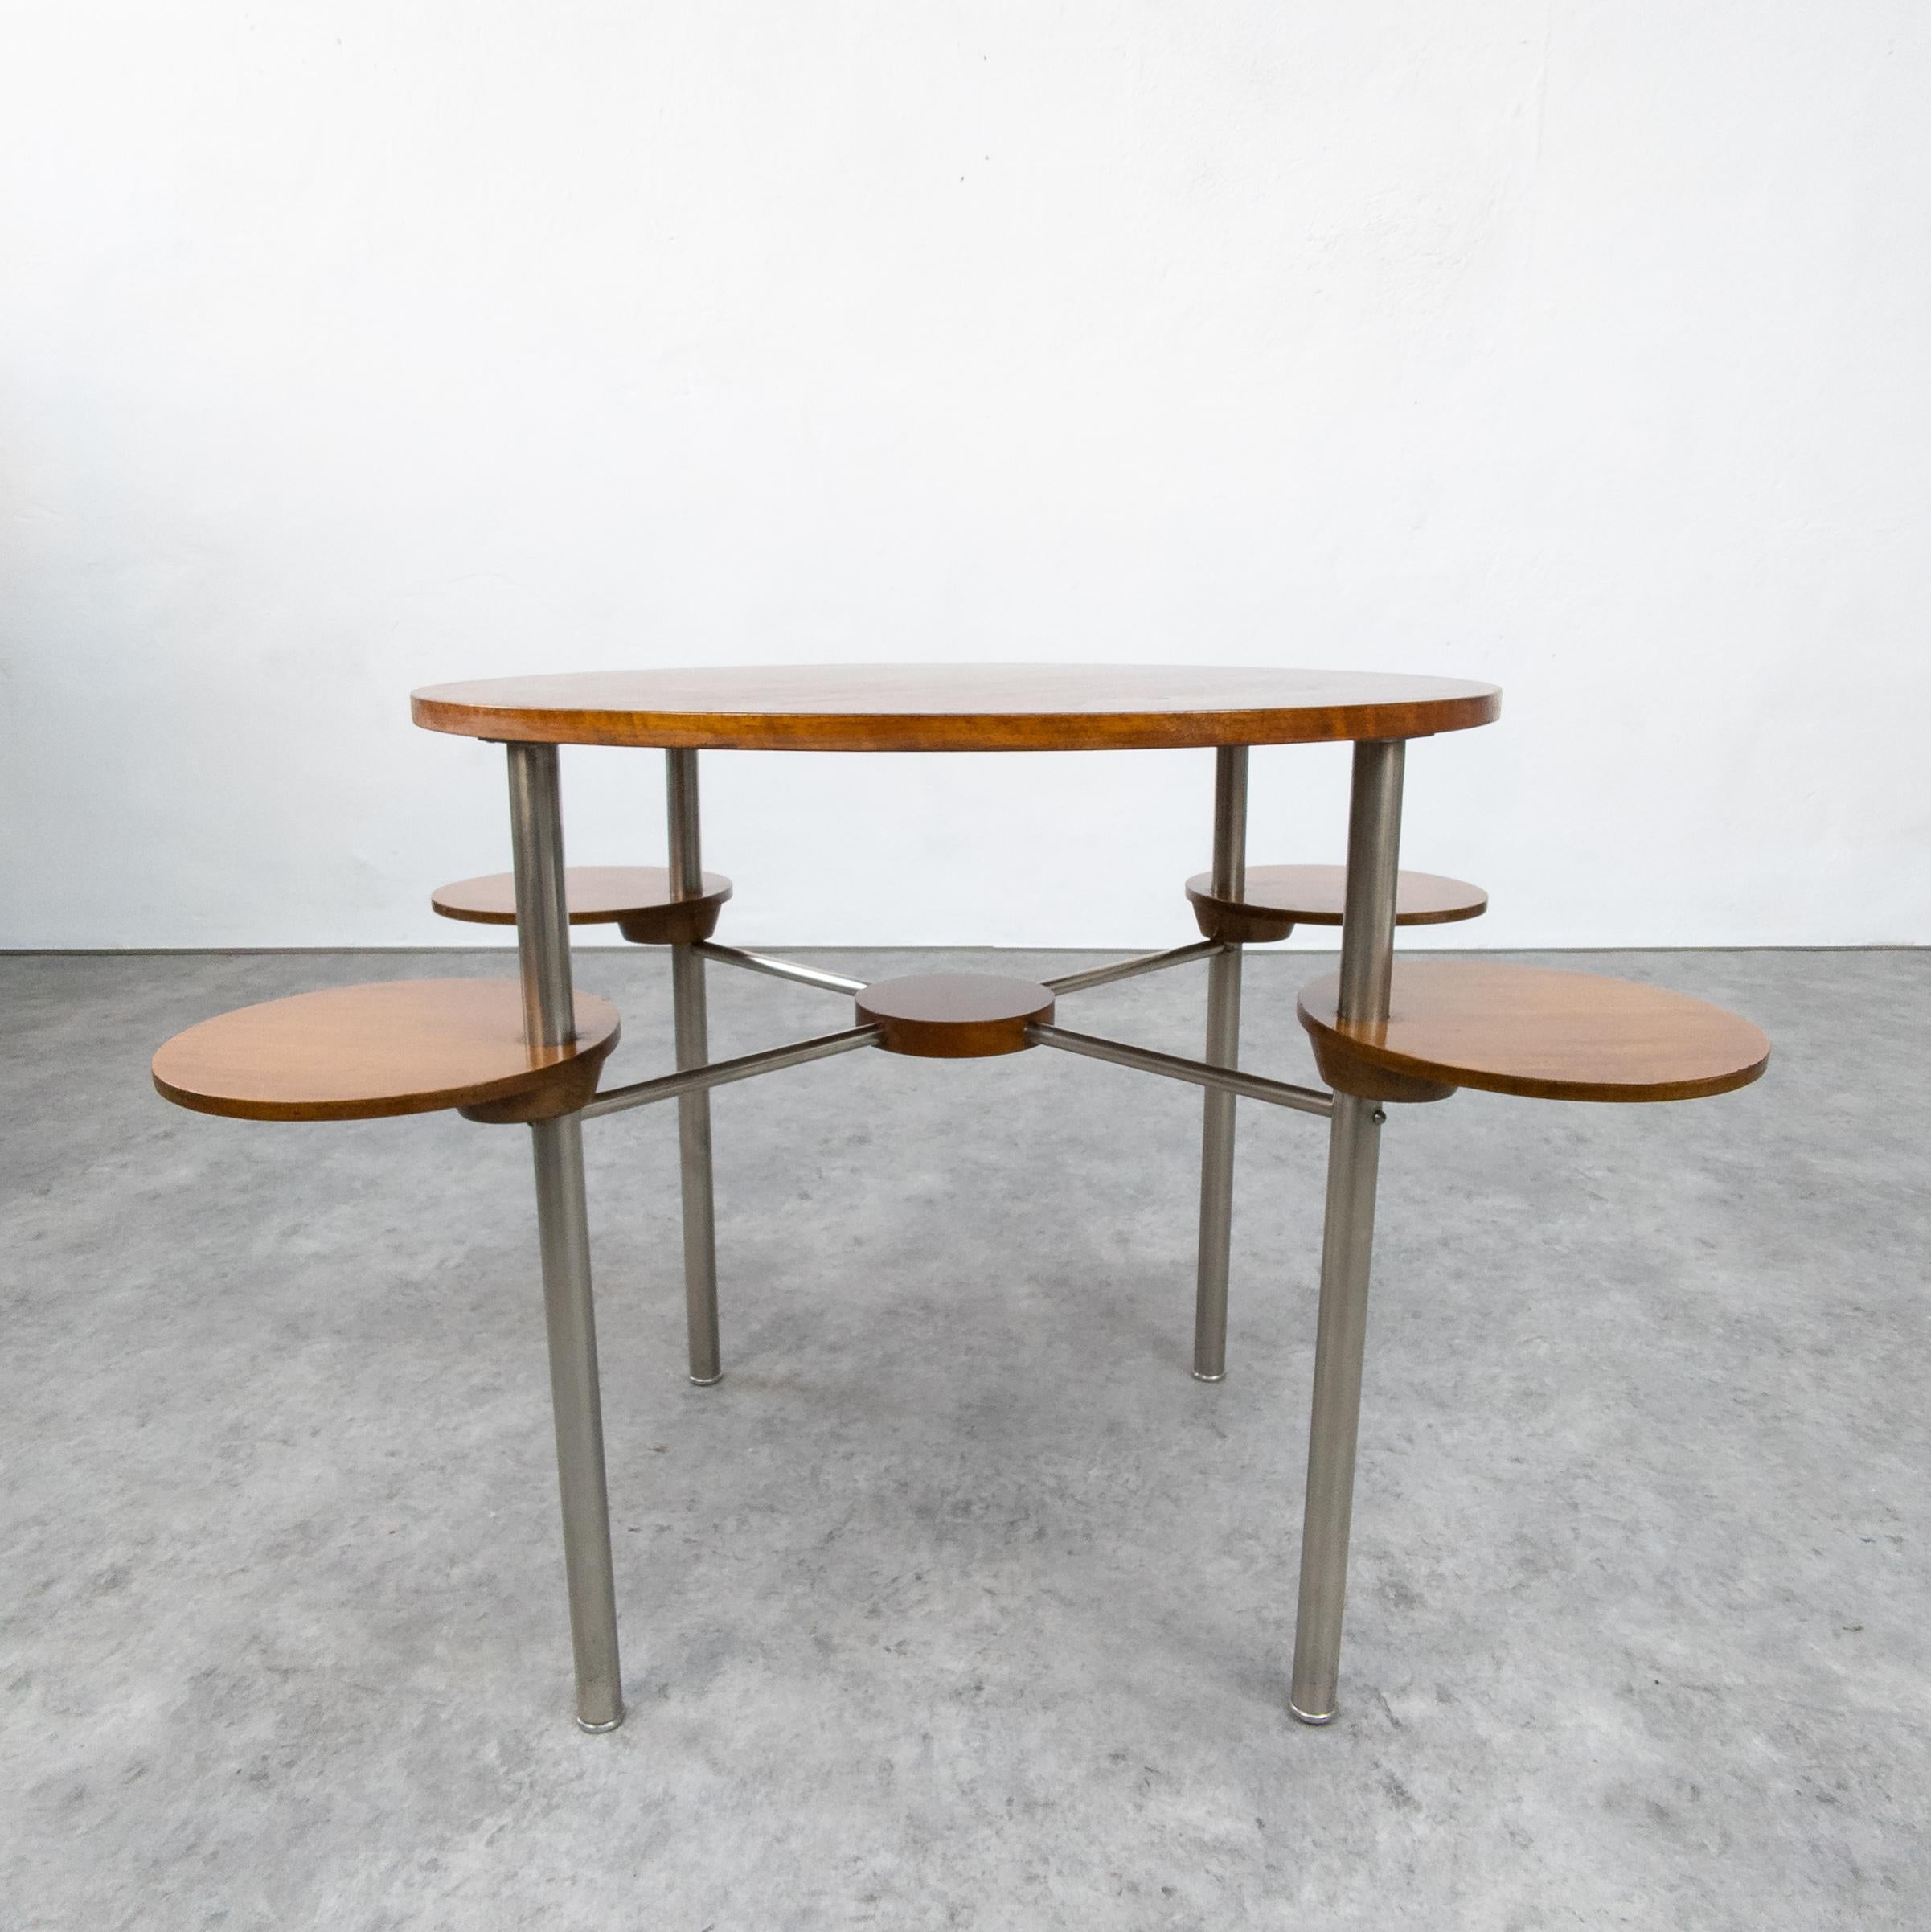 Designed by famous Czech architect Jindřich Halabala for UP Závody Brno, Czechoslovakia in 1930's. Games or side table in an excellent original condition with beautiful patina. Expertly polished. Oak veneered wood and nickel plated tubular steel.